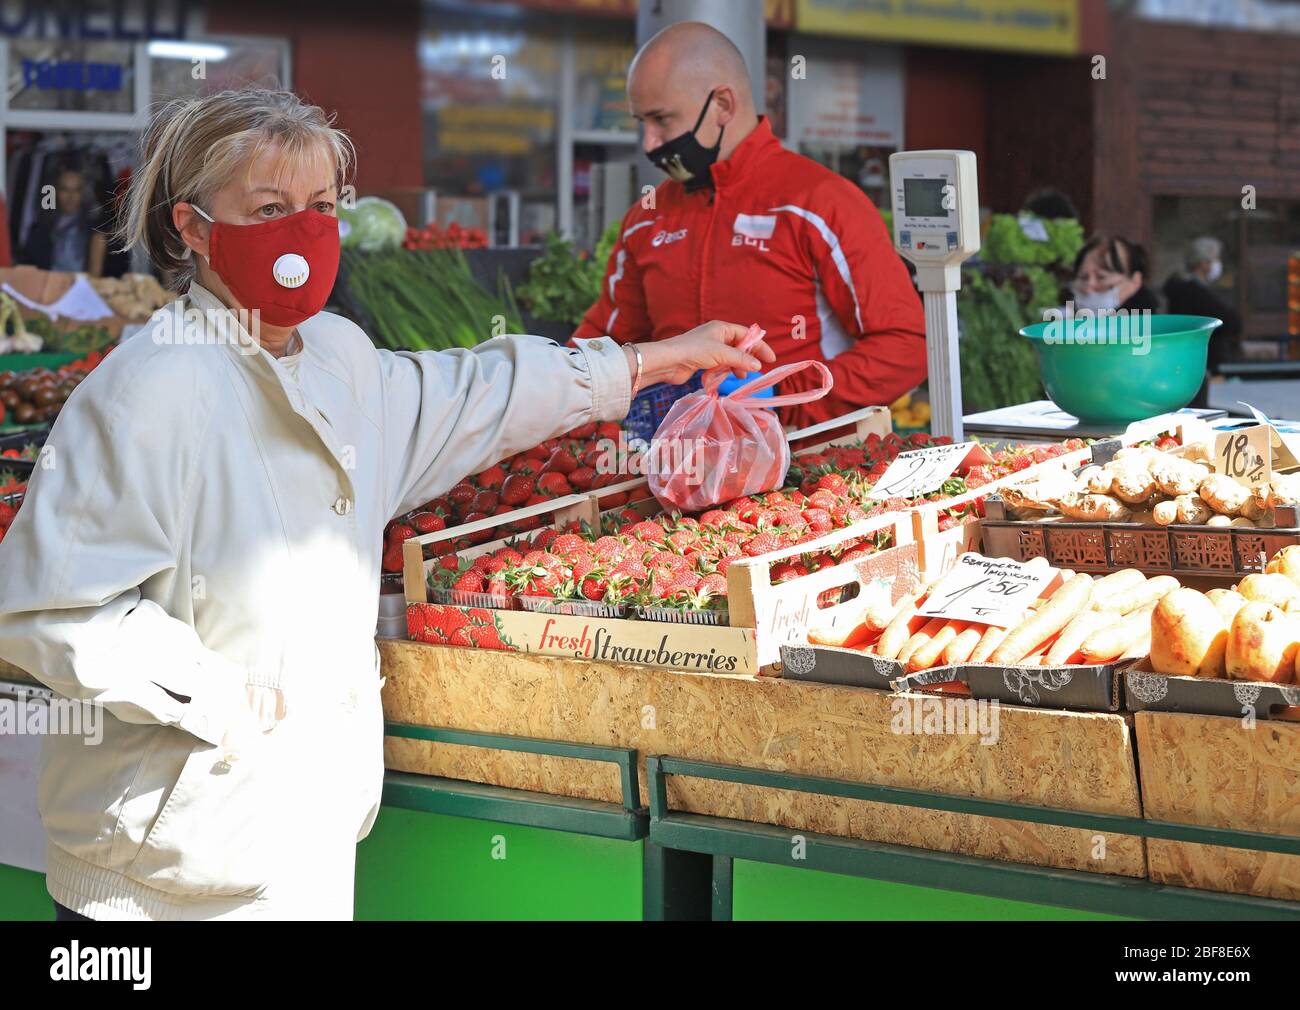 People wearing face masks and gloves for prevention of coronavirus COVID-19 on a marketplace in Sofia, Bulgaria on 04/14/2020. Stock Photo